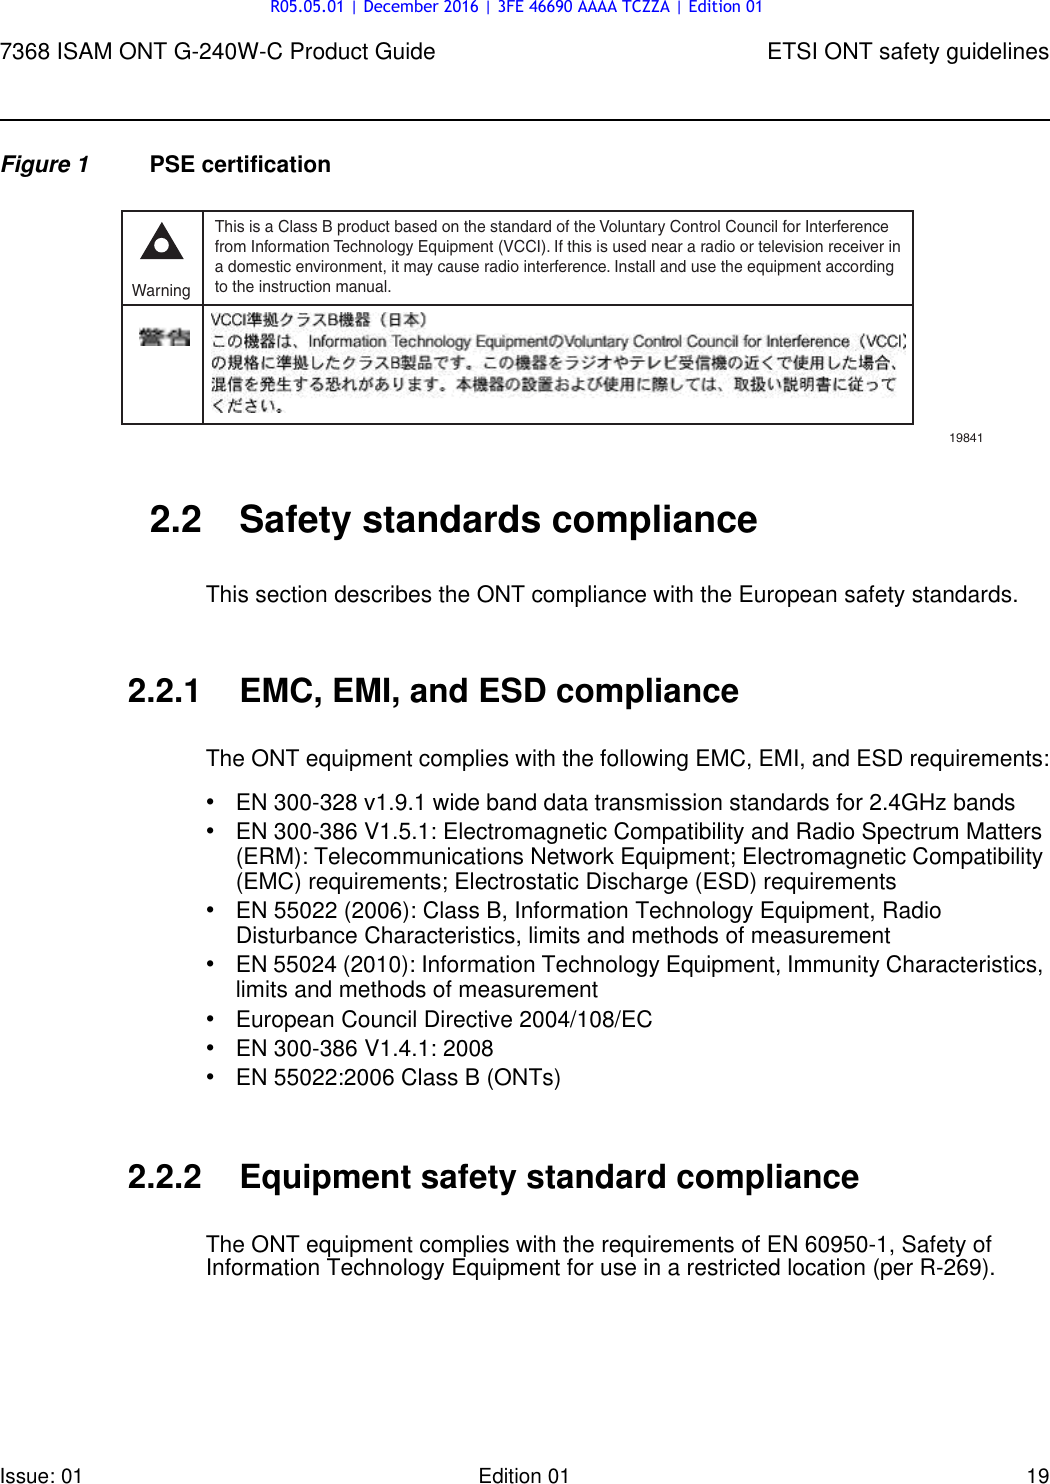 Page 19 of Nokia Bell G240W-C GPON ONU User Manual 7368 ISAM ONT G 240W B Product Guide